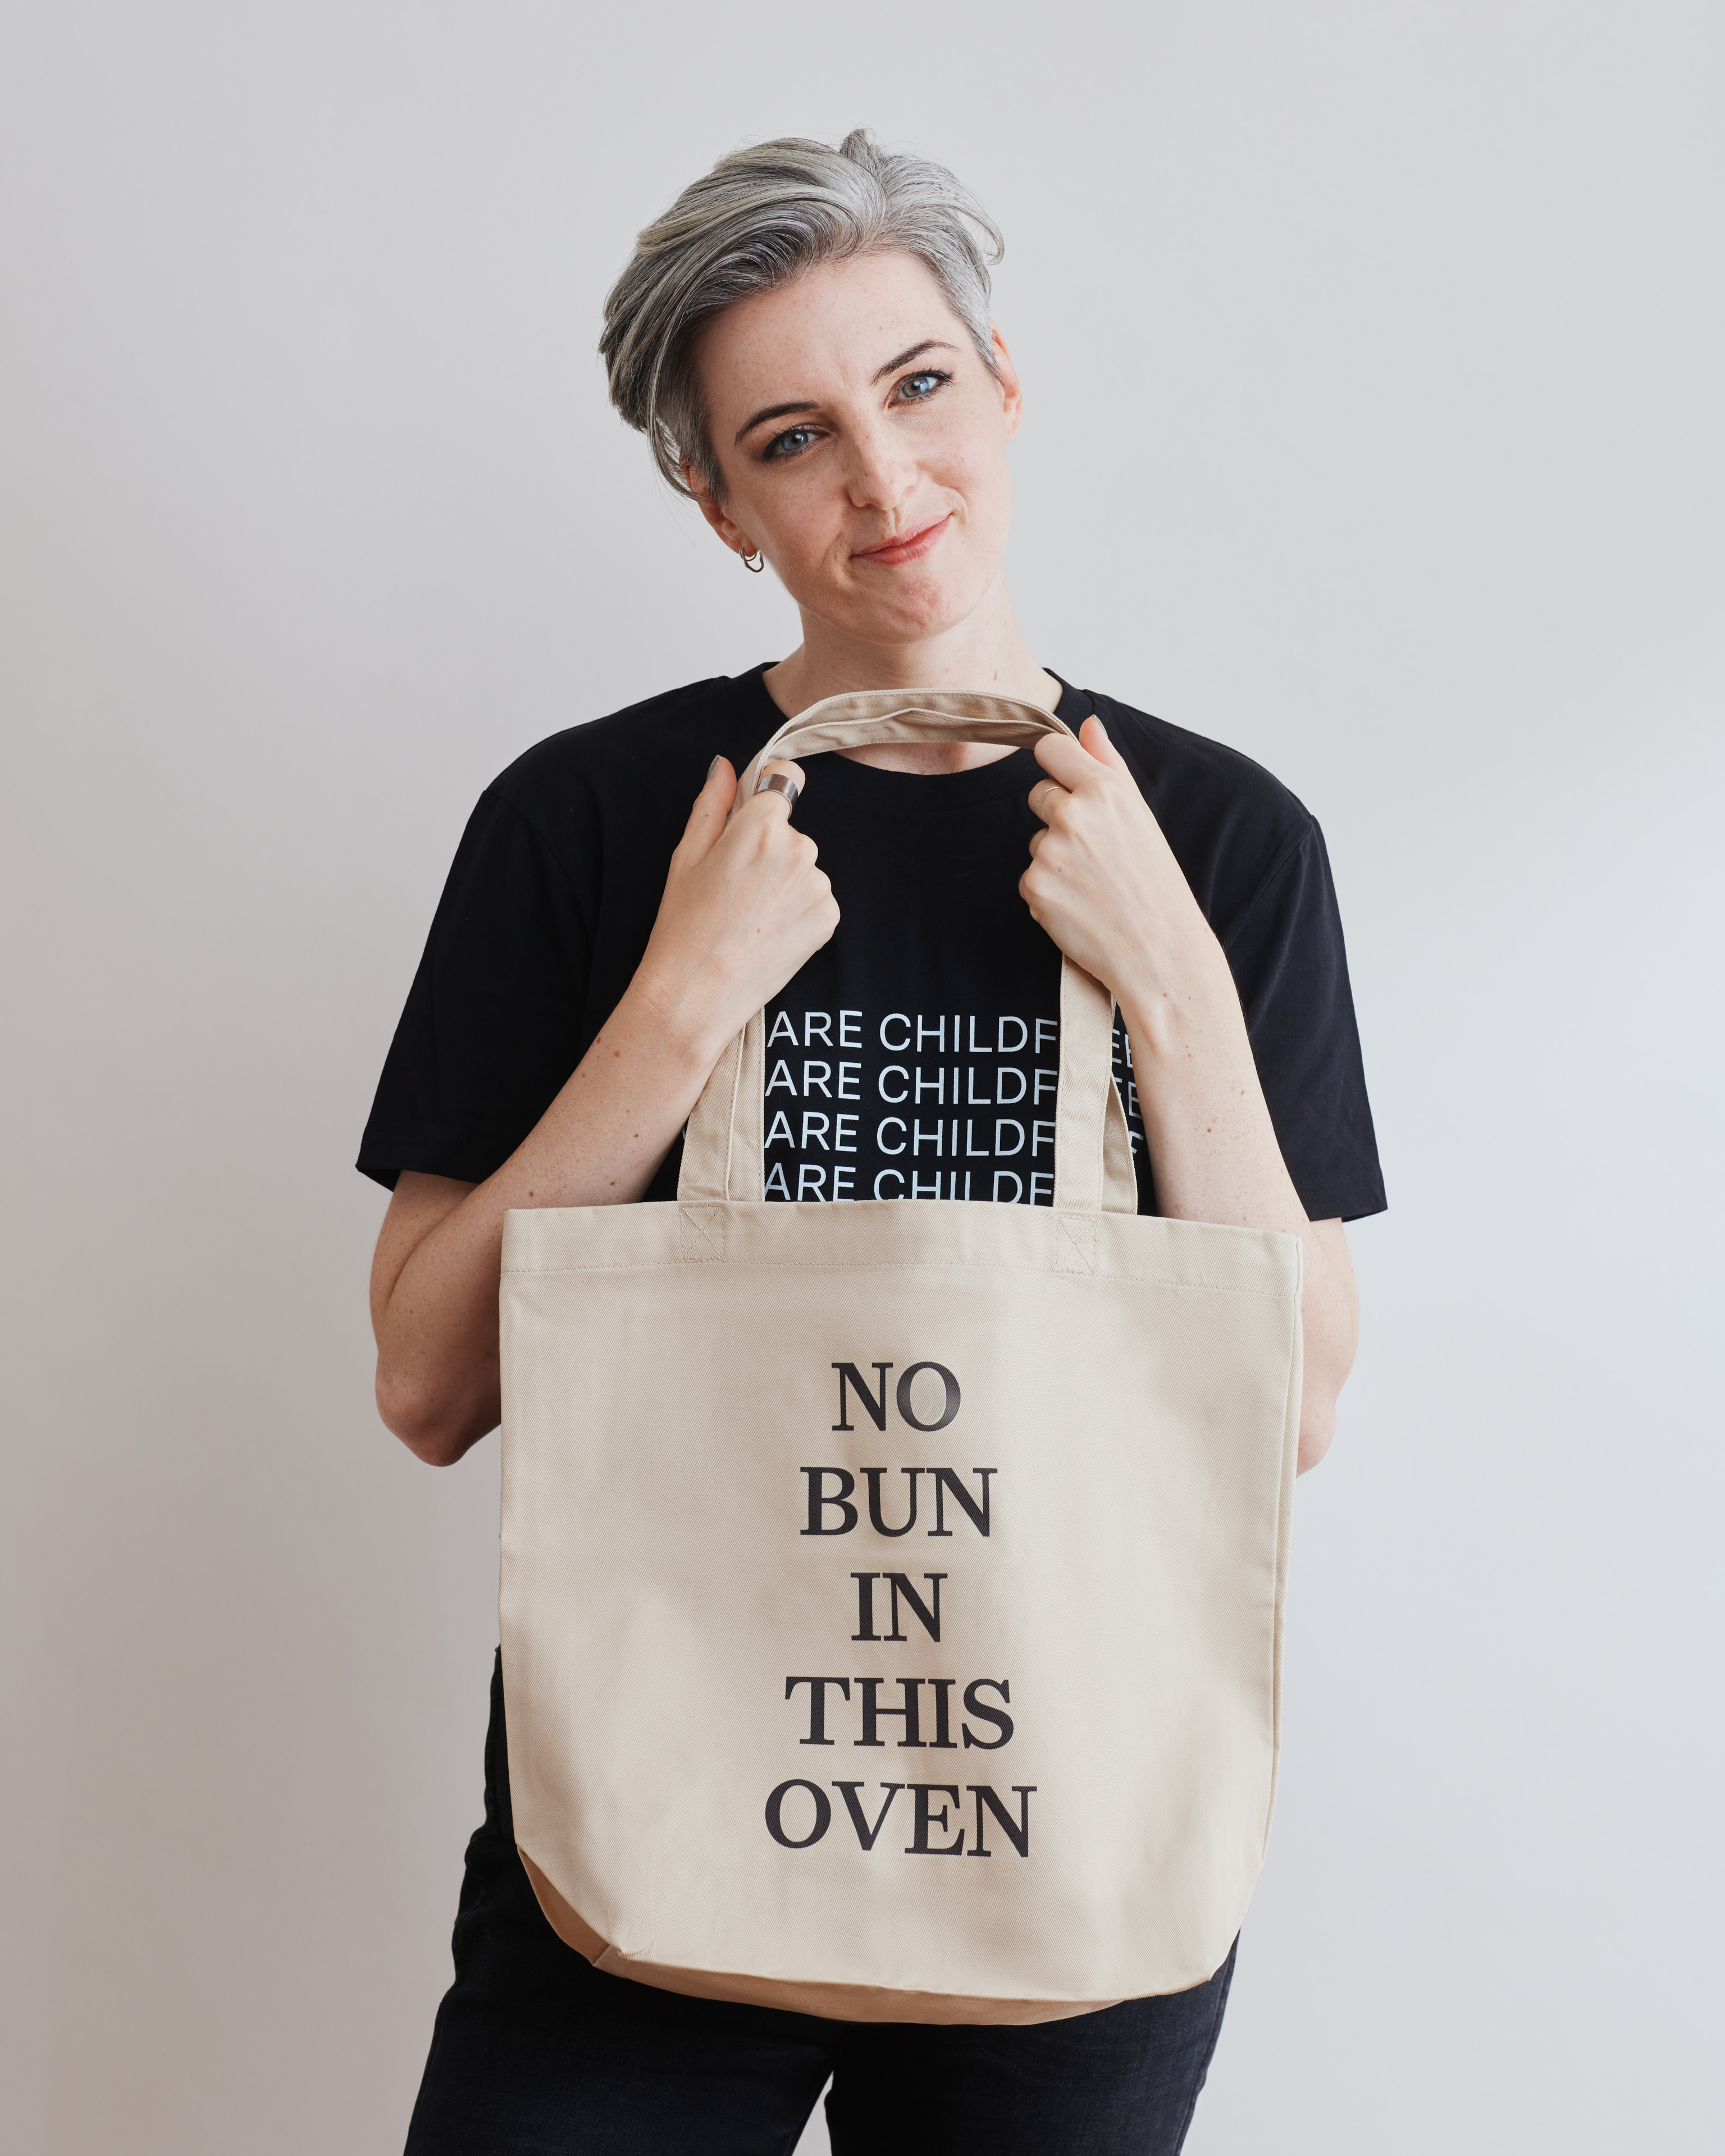 No Bun In This Oven tote bag